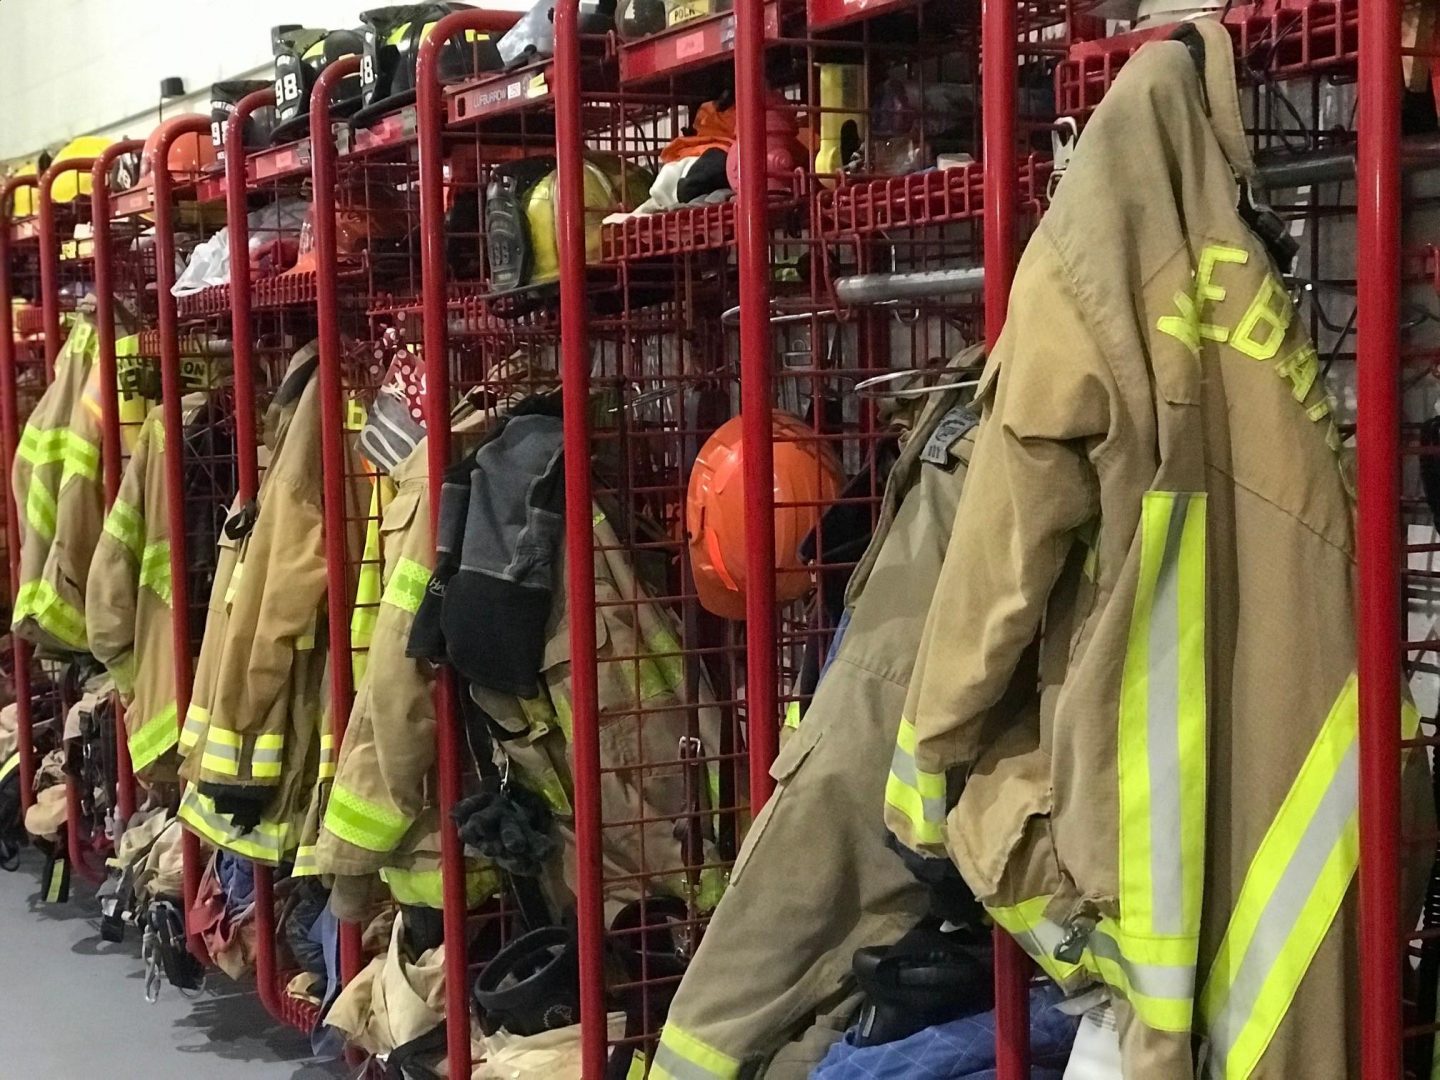 Bunker gear hangs in the garage of the fire house in Mt. Lebanon. The township has a combination fire house — a mix of volunteer and career firefighters.